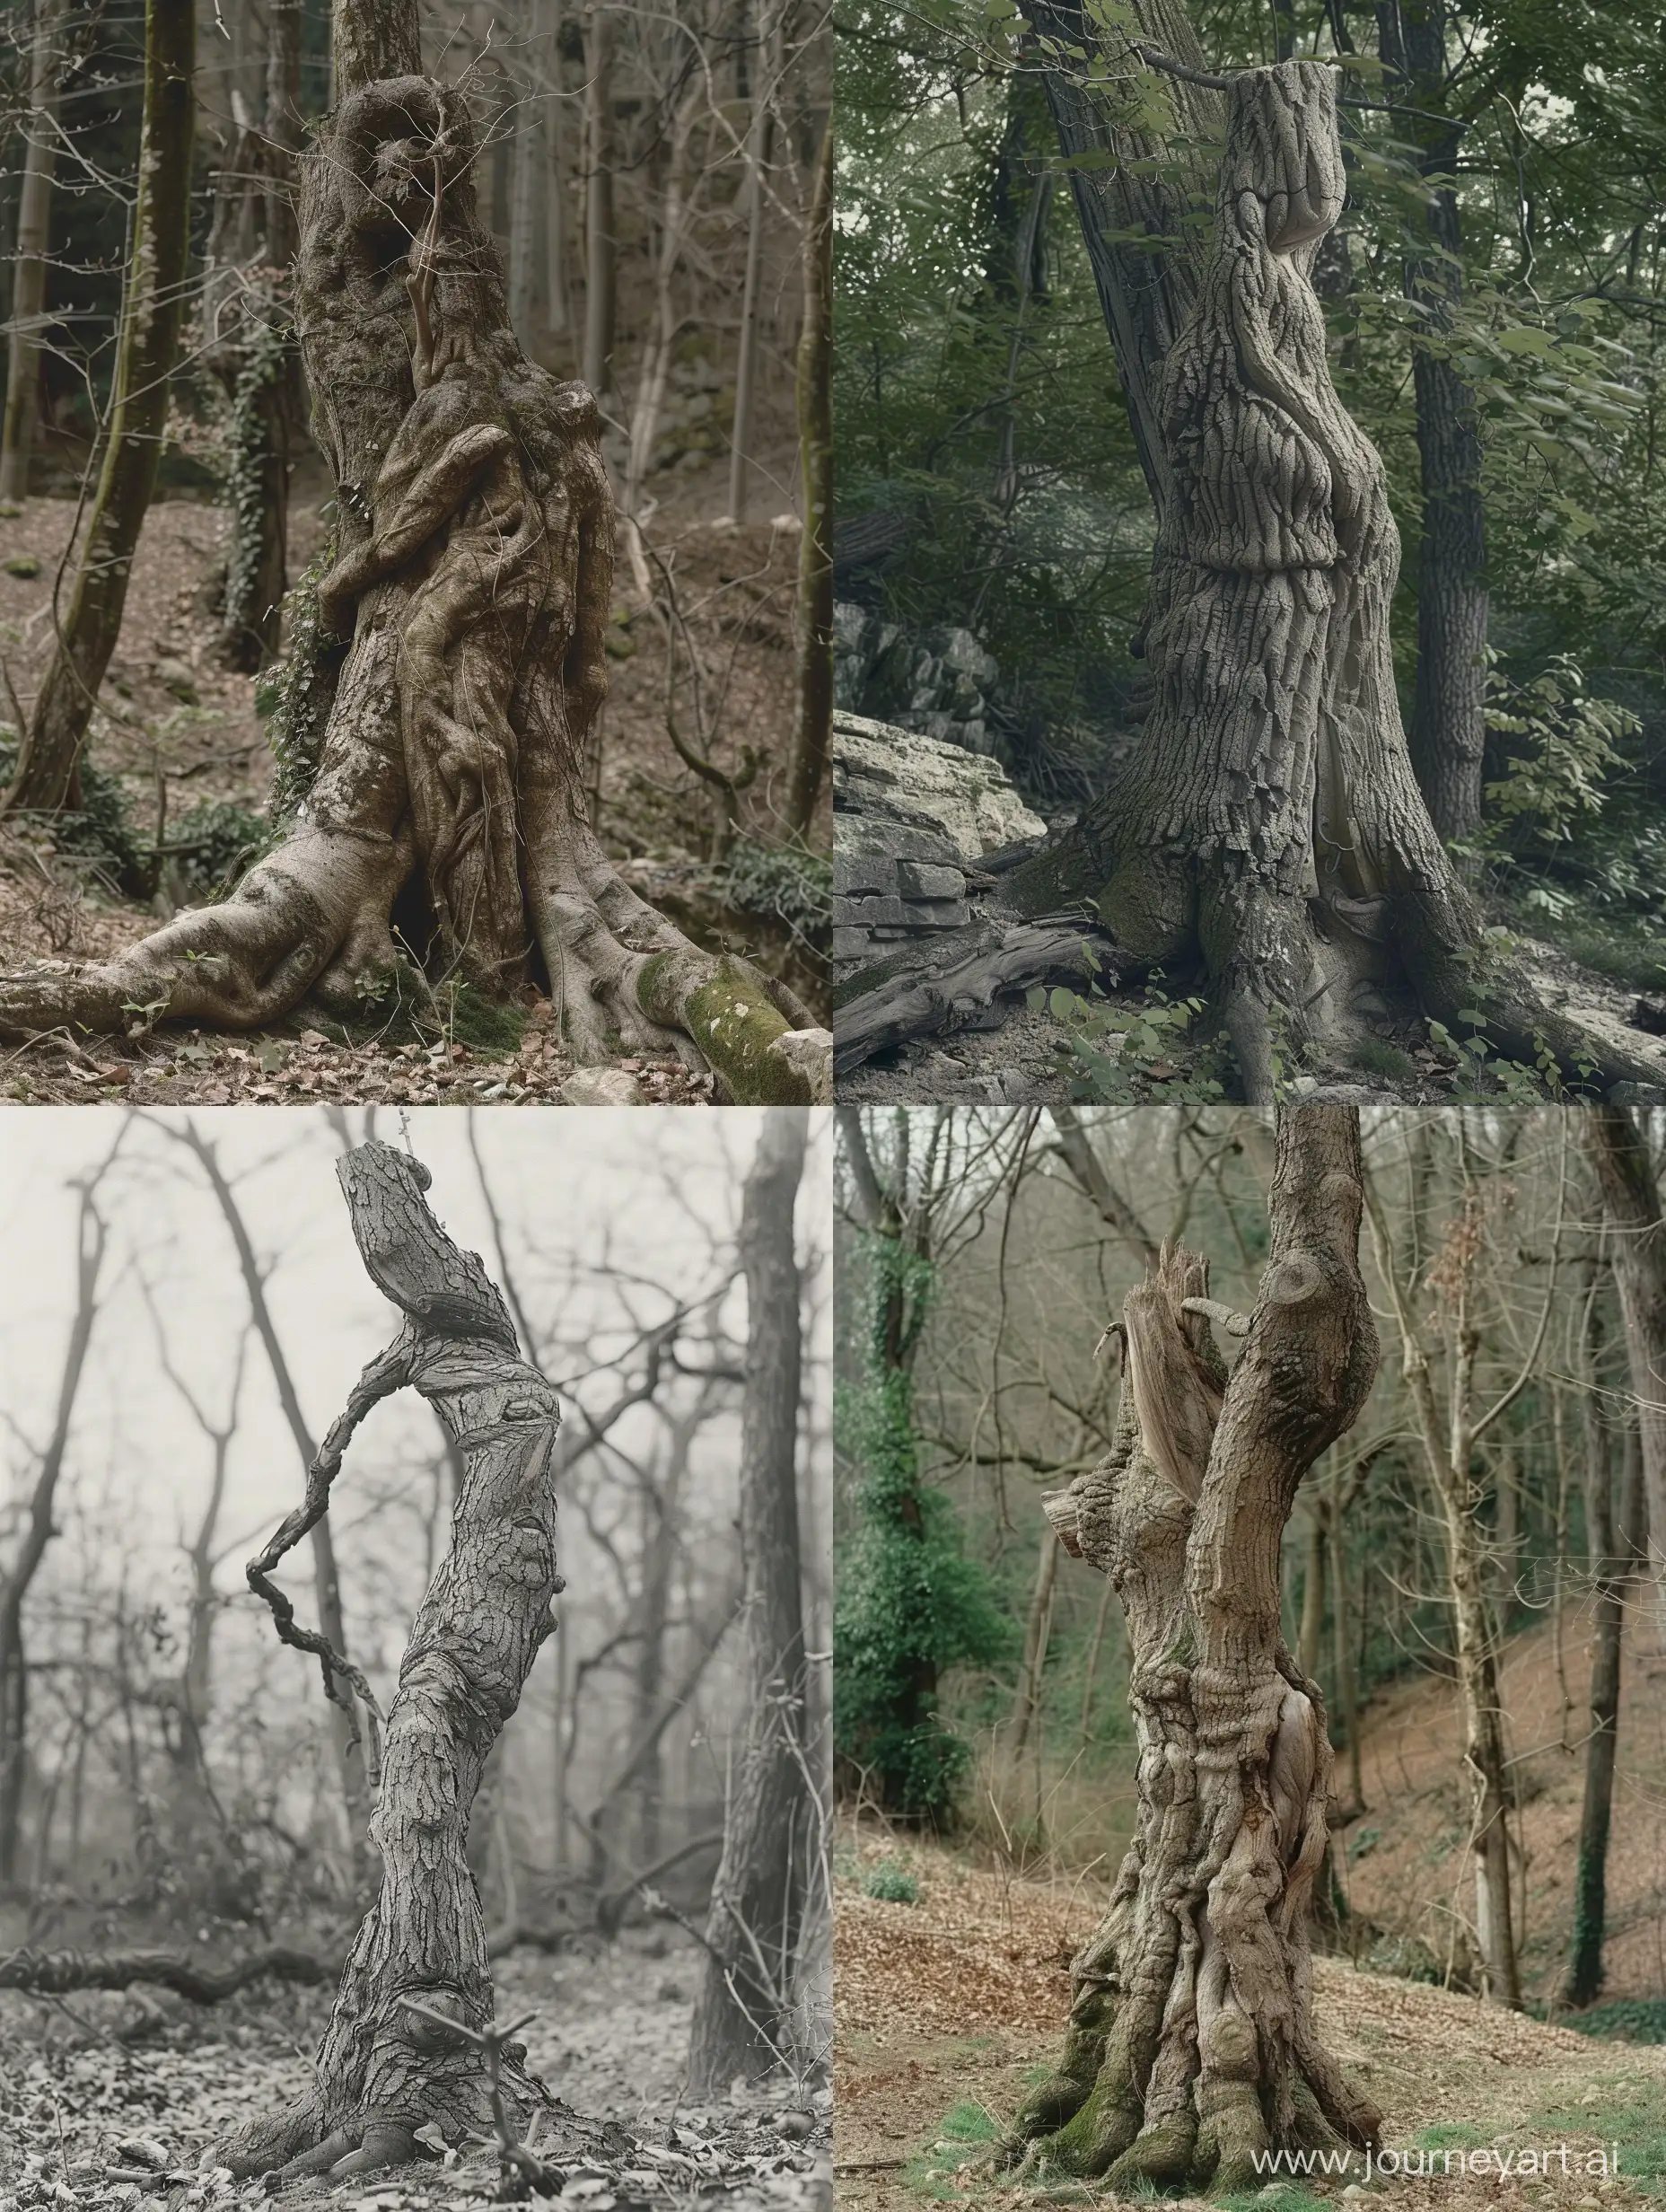 A tree that once was a woman. The tree resembles a woman, with a body, a face, arms and legs. The tree is standing in a forest. Realistic photograph